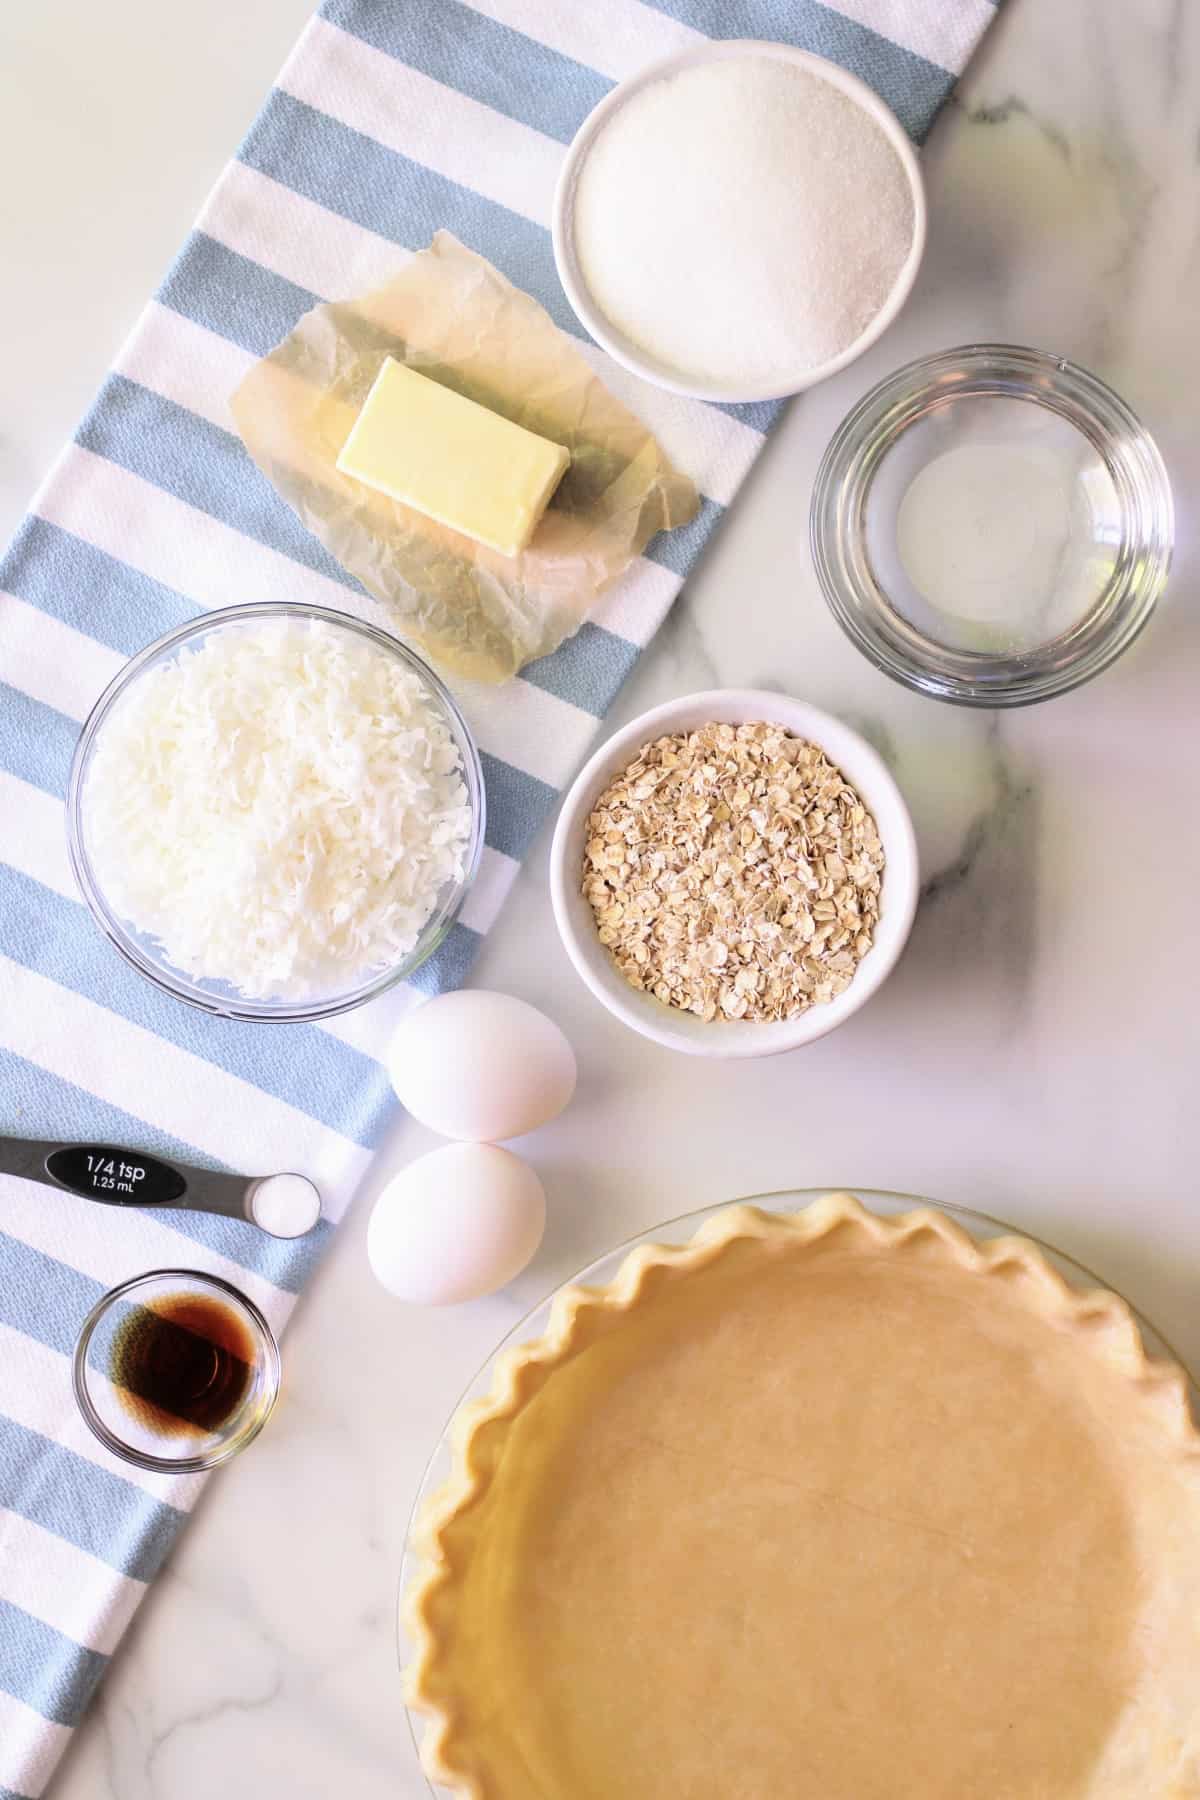 Ingredients for Old-Fashioned Oatmeal Pie